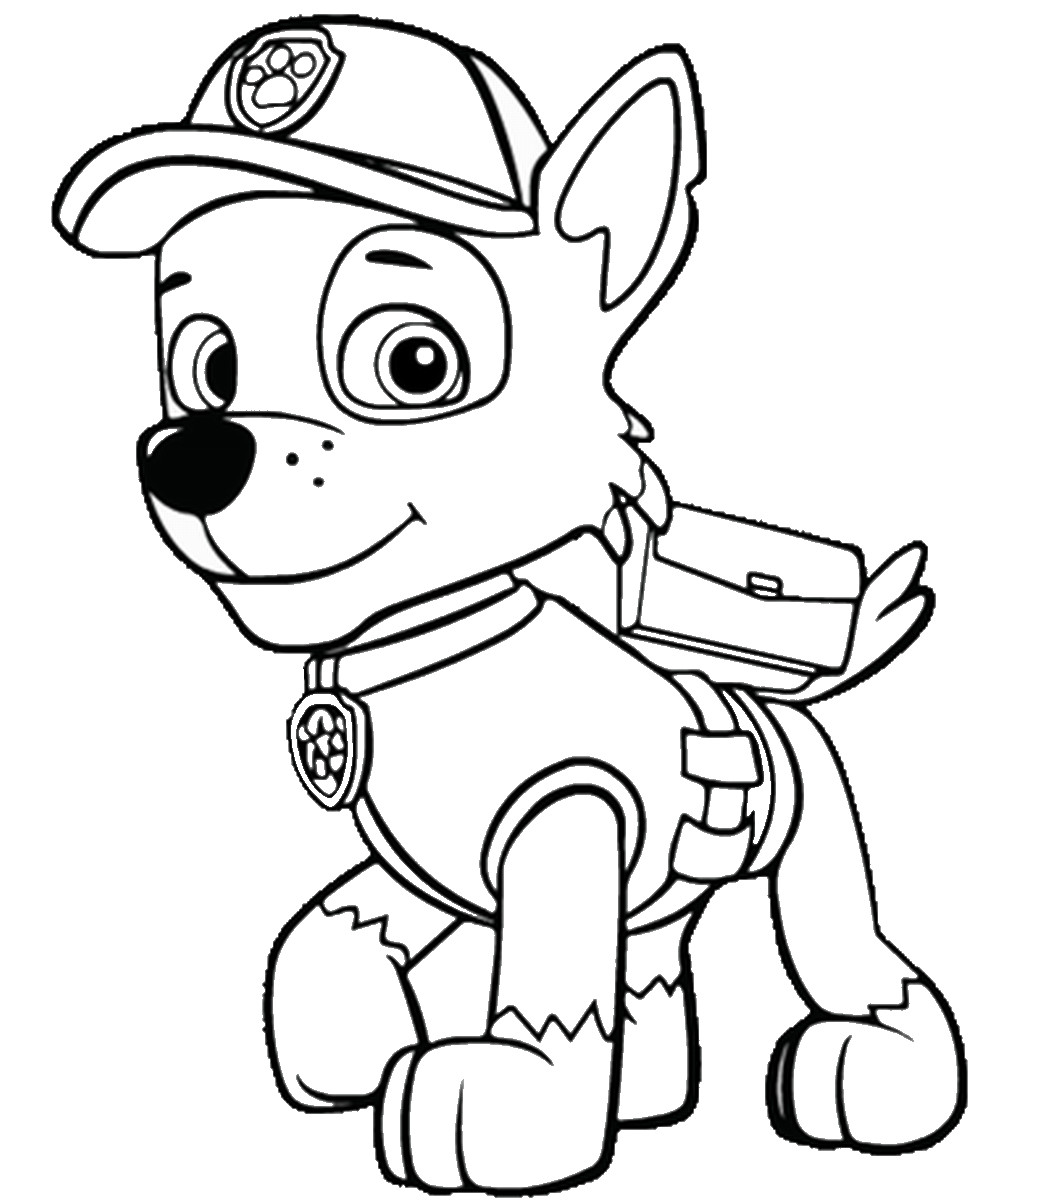 Kids Coloring Pages Free
 Paw Patrol Coloring Pages Best Coloring Pages For Kids